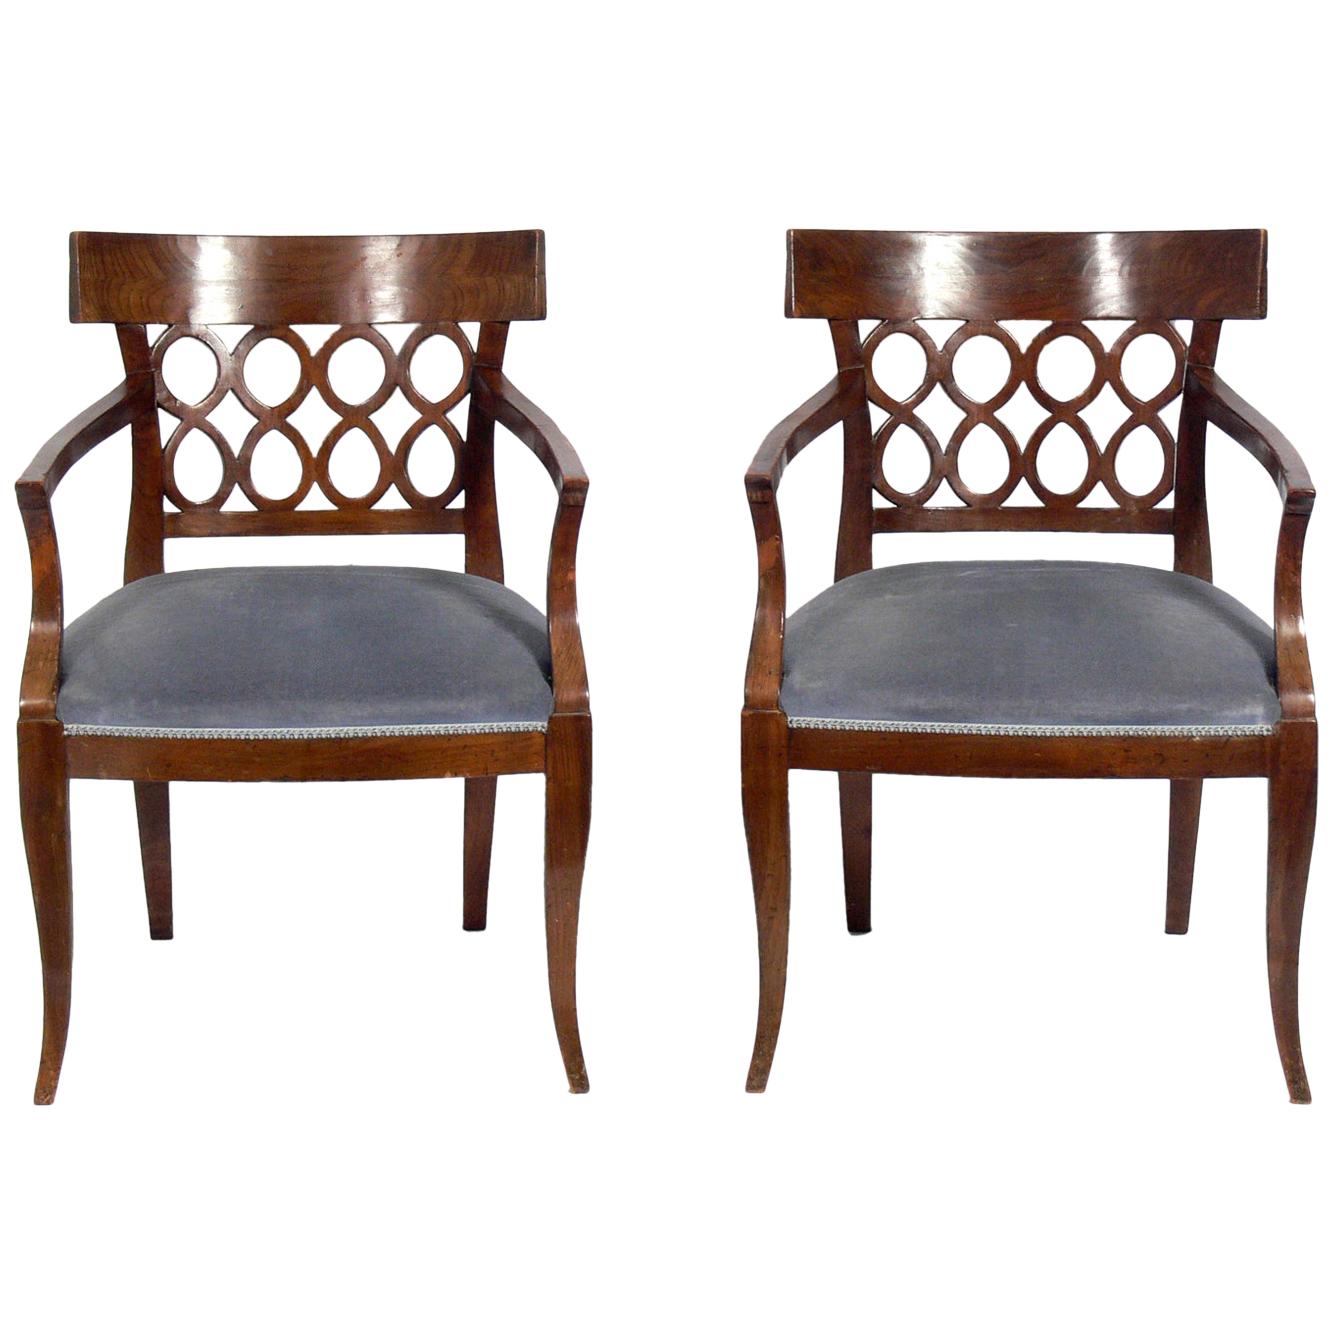 Pair of Curvaceous Italian Fret Back Chairs For Sale